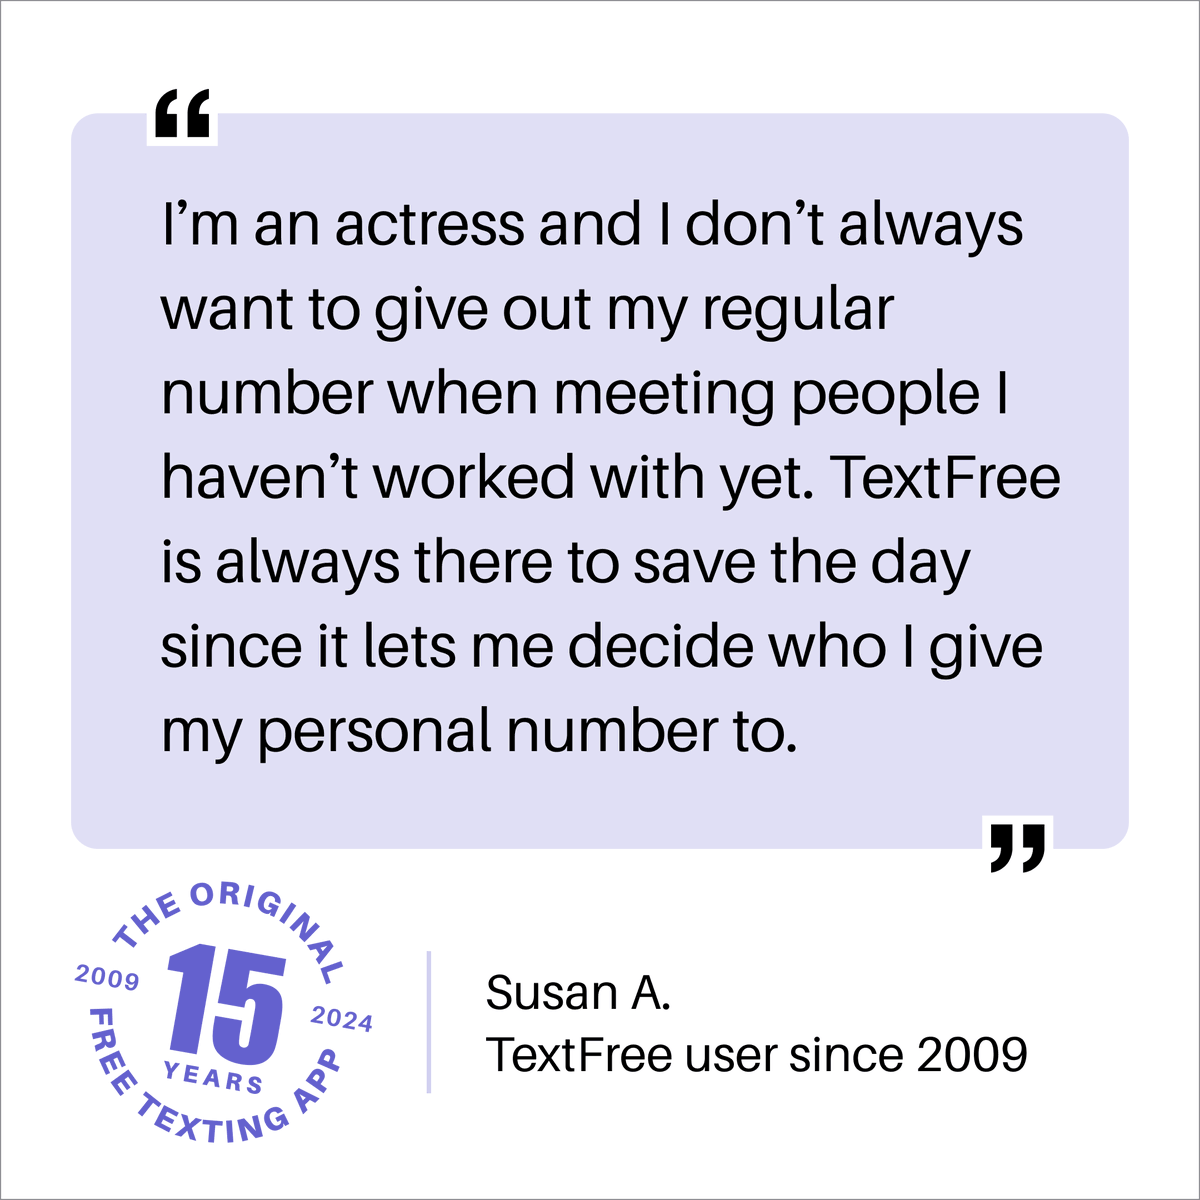 We’re glad to hear that you’re using TextFree to protect your privacy, Susan. Good luck with those acting gigs! 🎬

#textfree #pinger #textfreebypinger #textfree15yearanniversary #15yearsoftextfree #freecalling #freetexting #secondnumber #technology #userstory